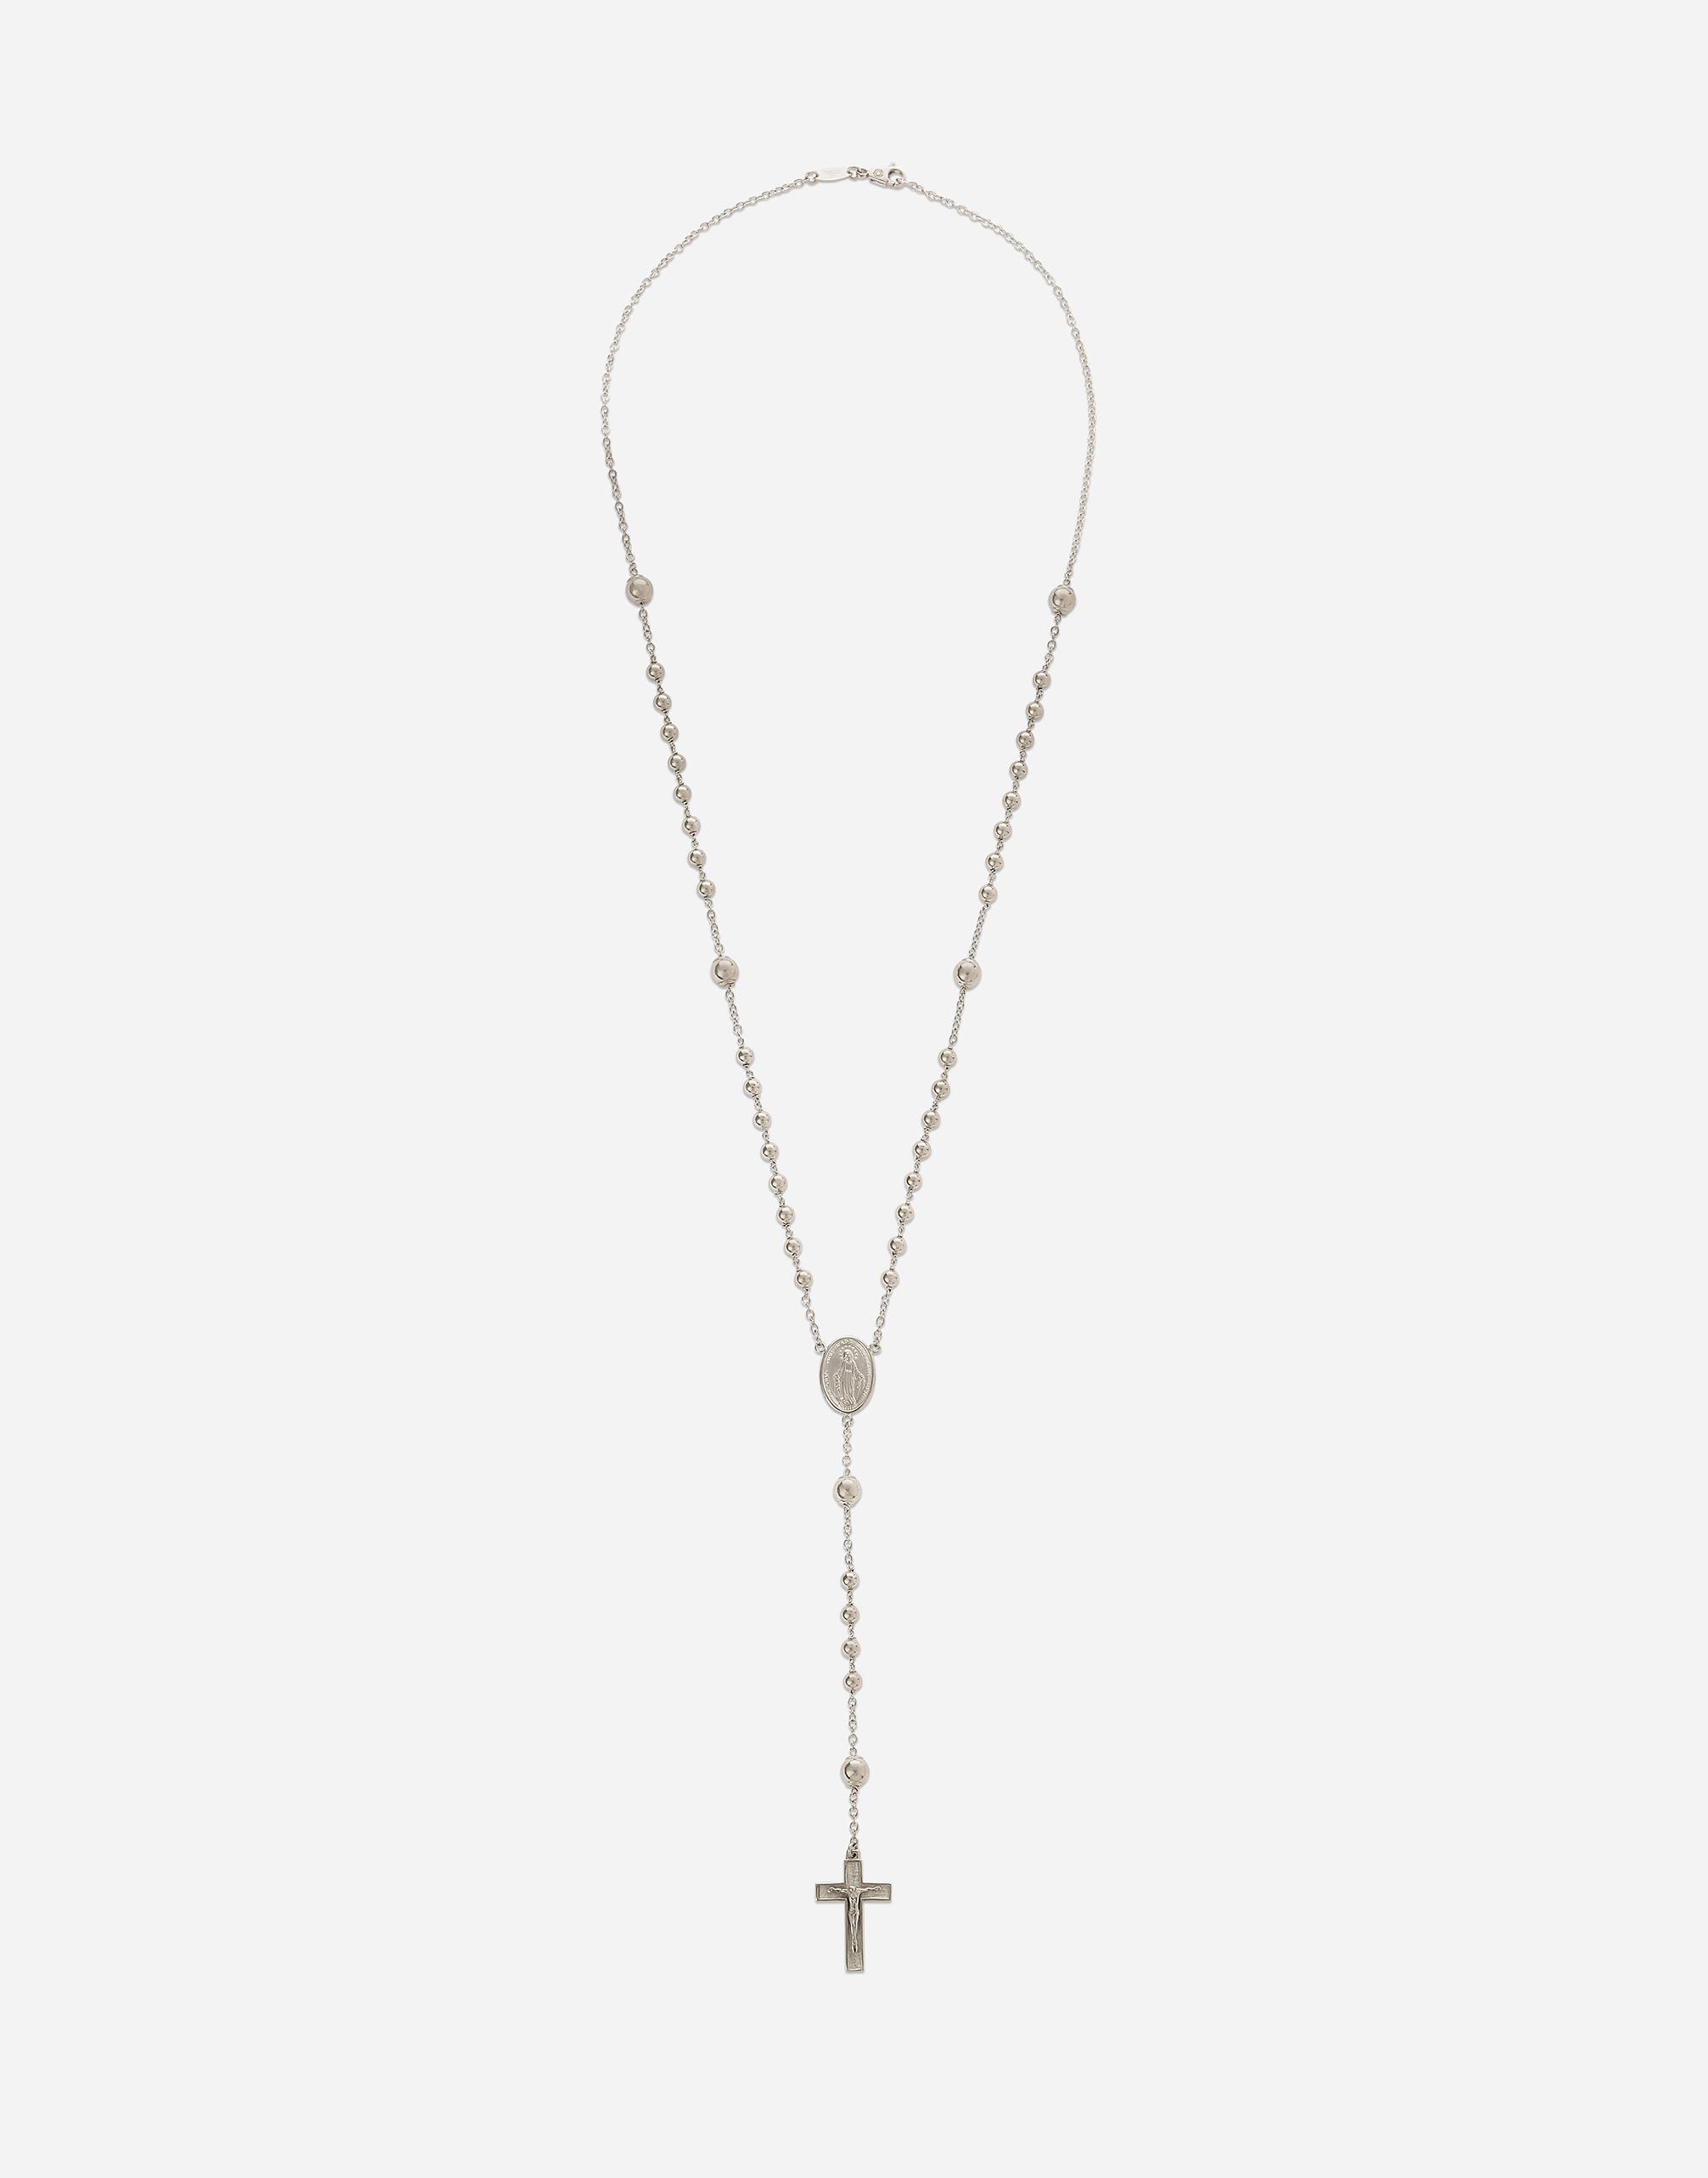 Dolce & Gabbana Tradition White Gold Rosary Necklace